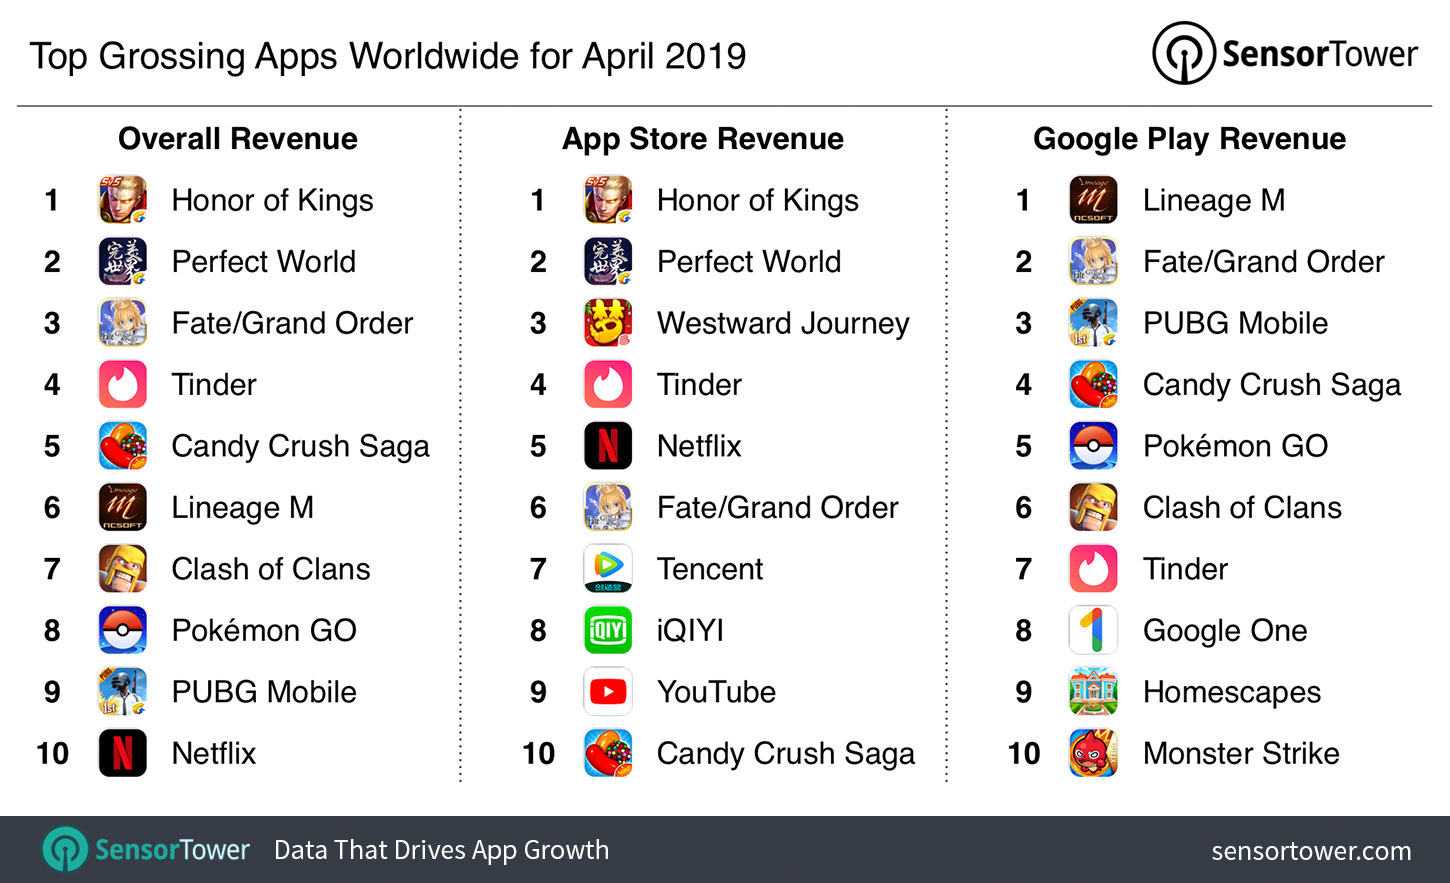 Top Grossing Apps Worldwide for April 2019